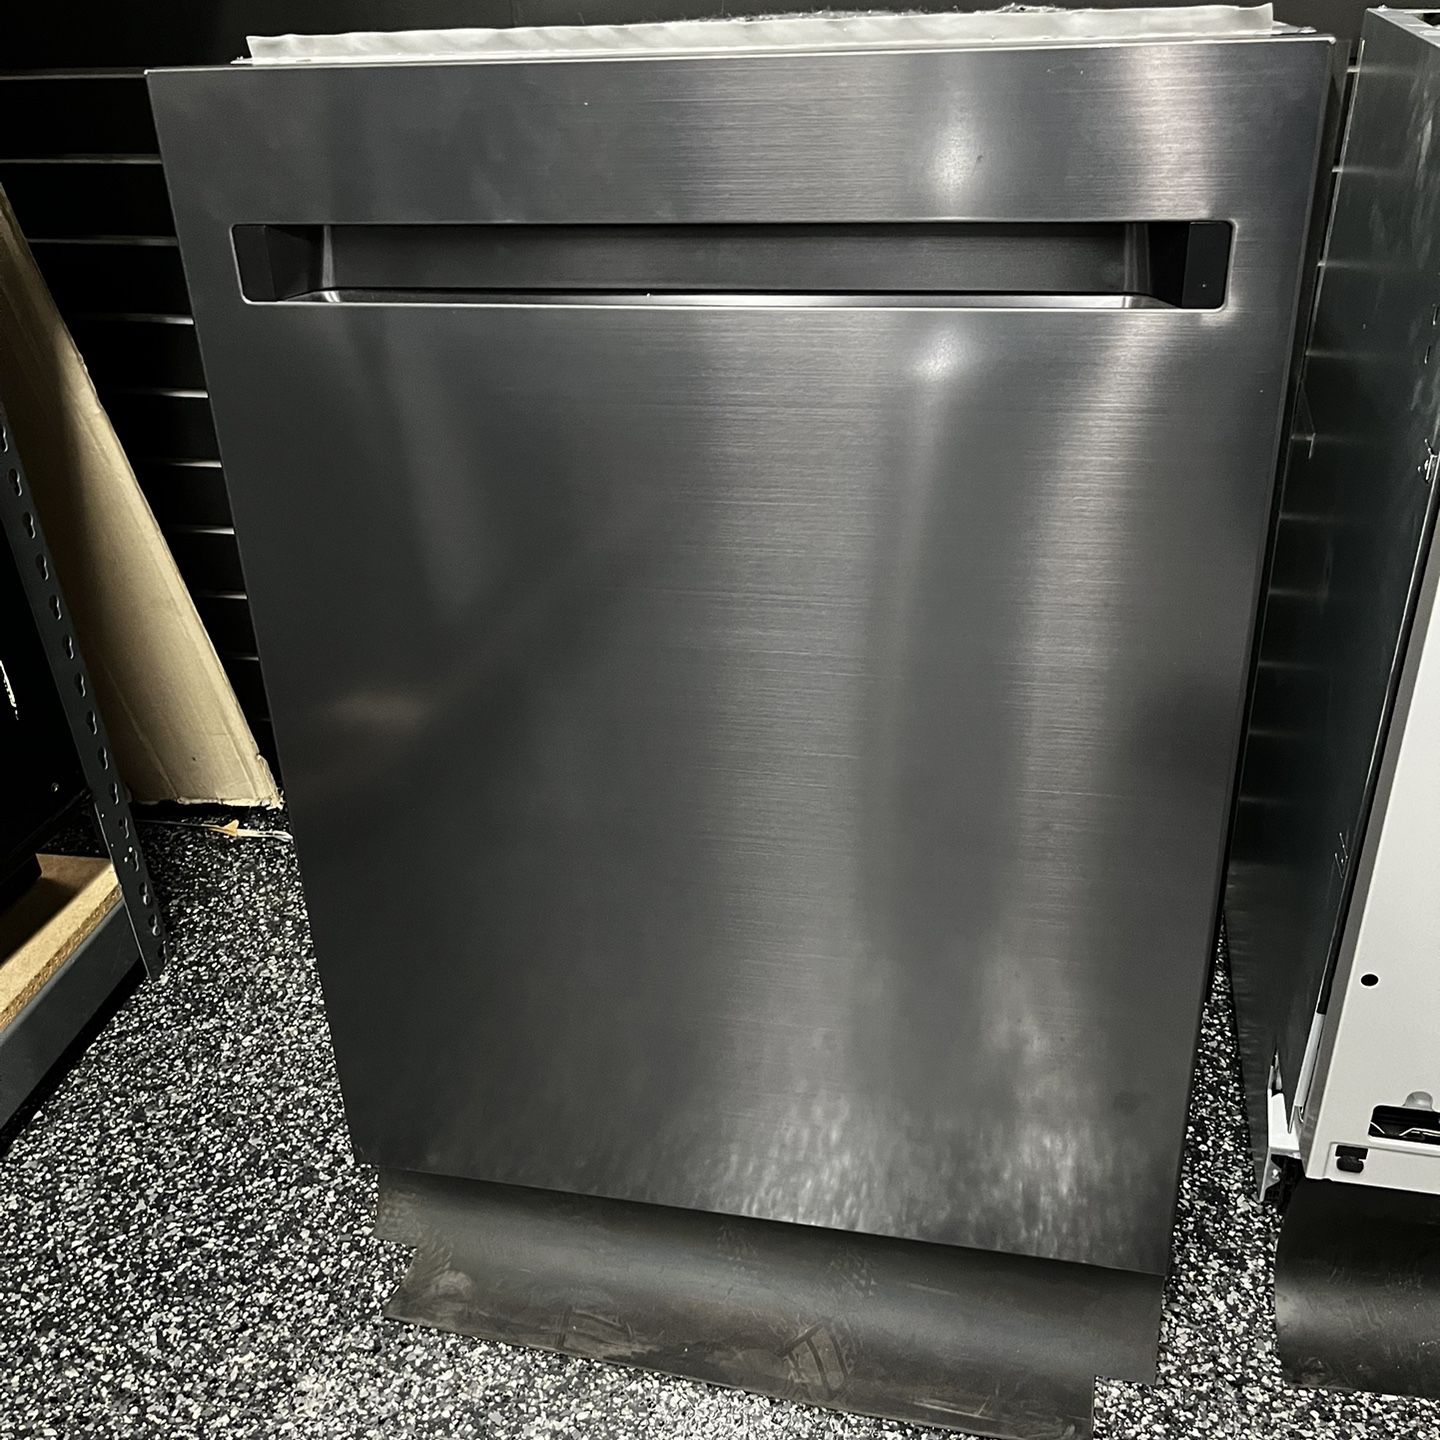 Dacor Graphite Stainless Steel 24” Built In Dishwasher 